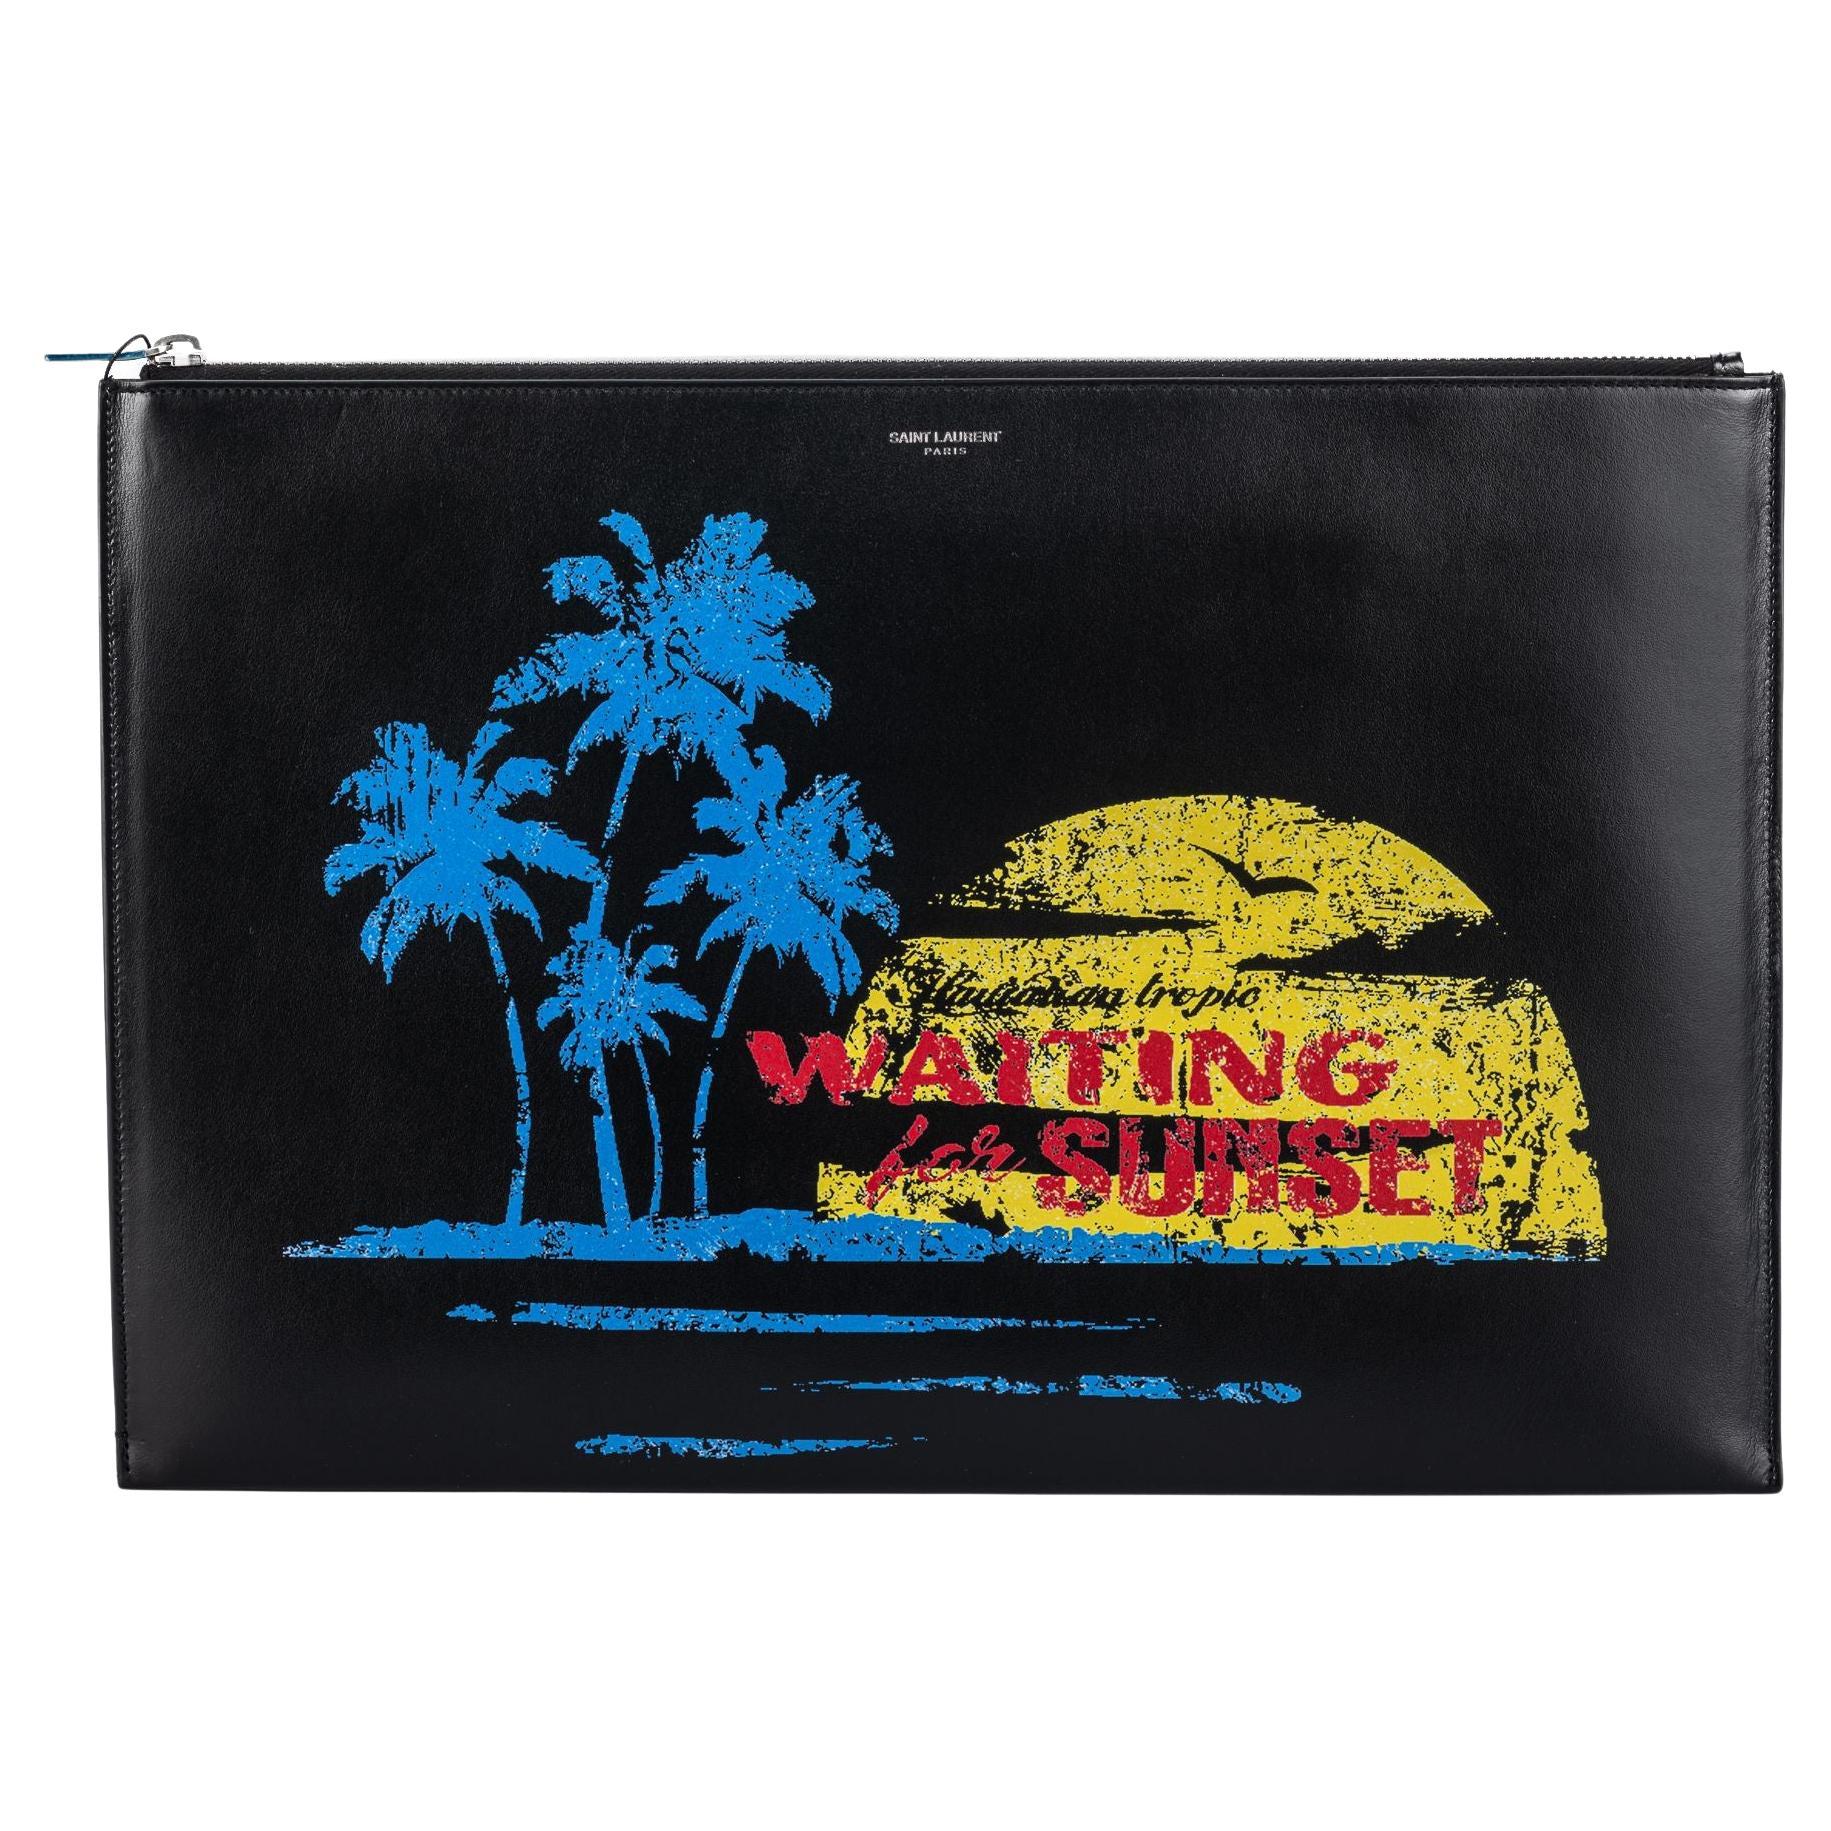 Yves Saint Laurent New Sunset Black Leather Clutch For Sale